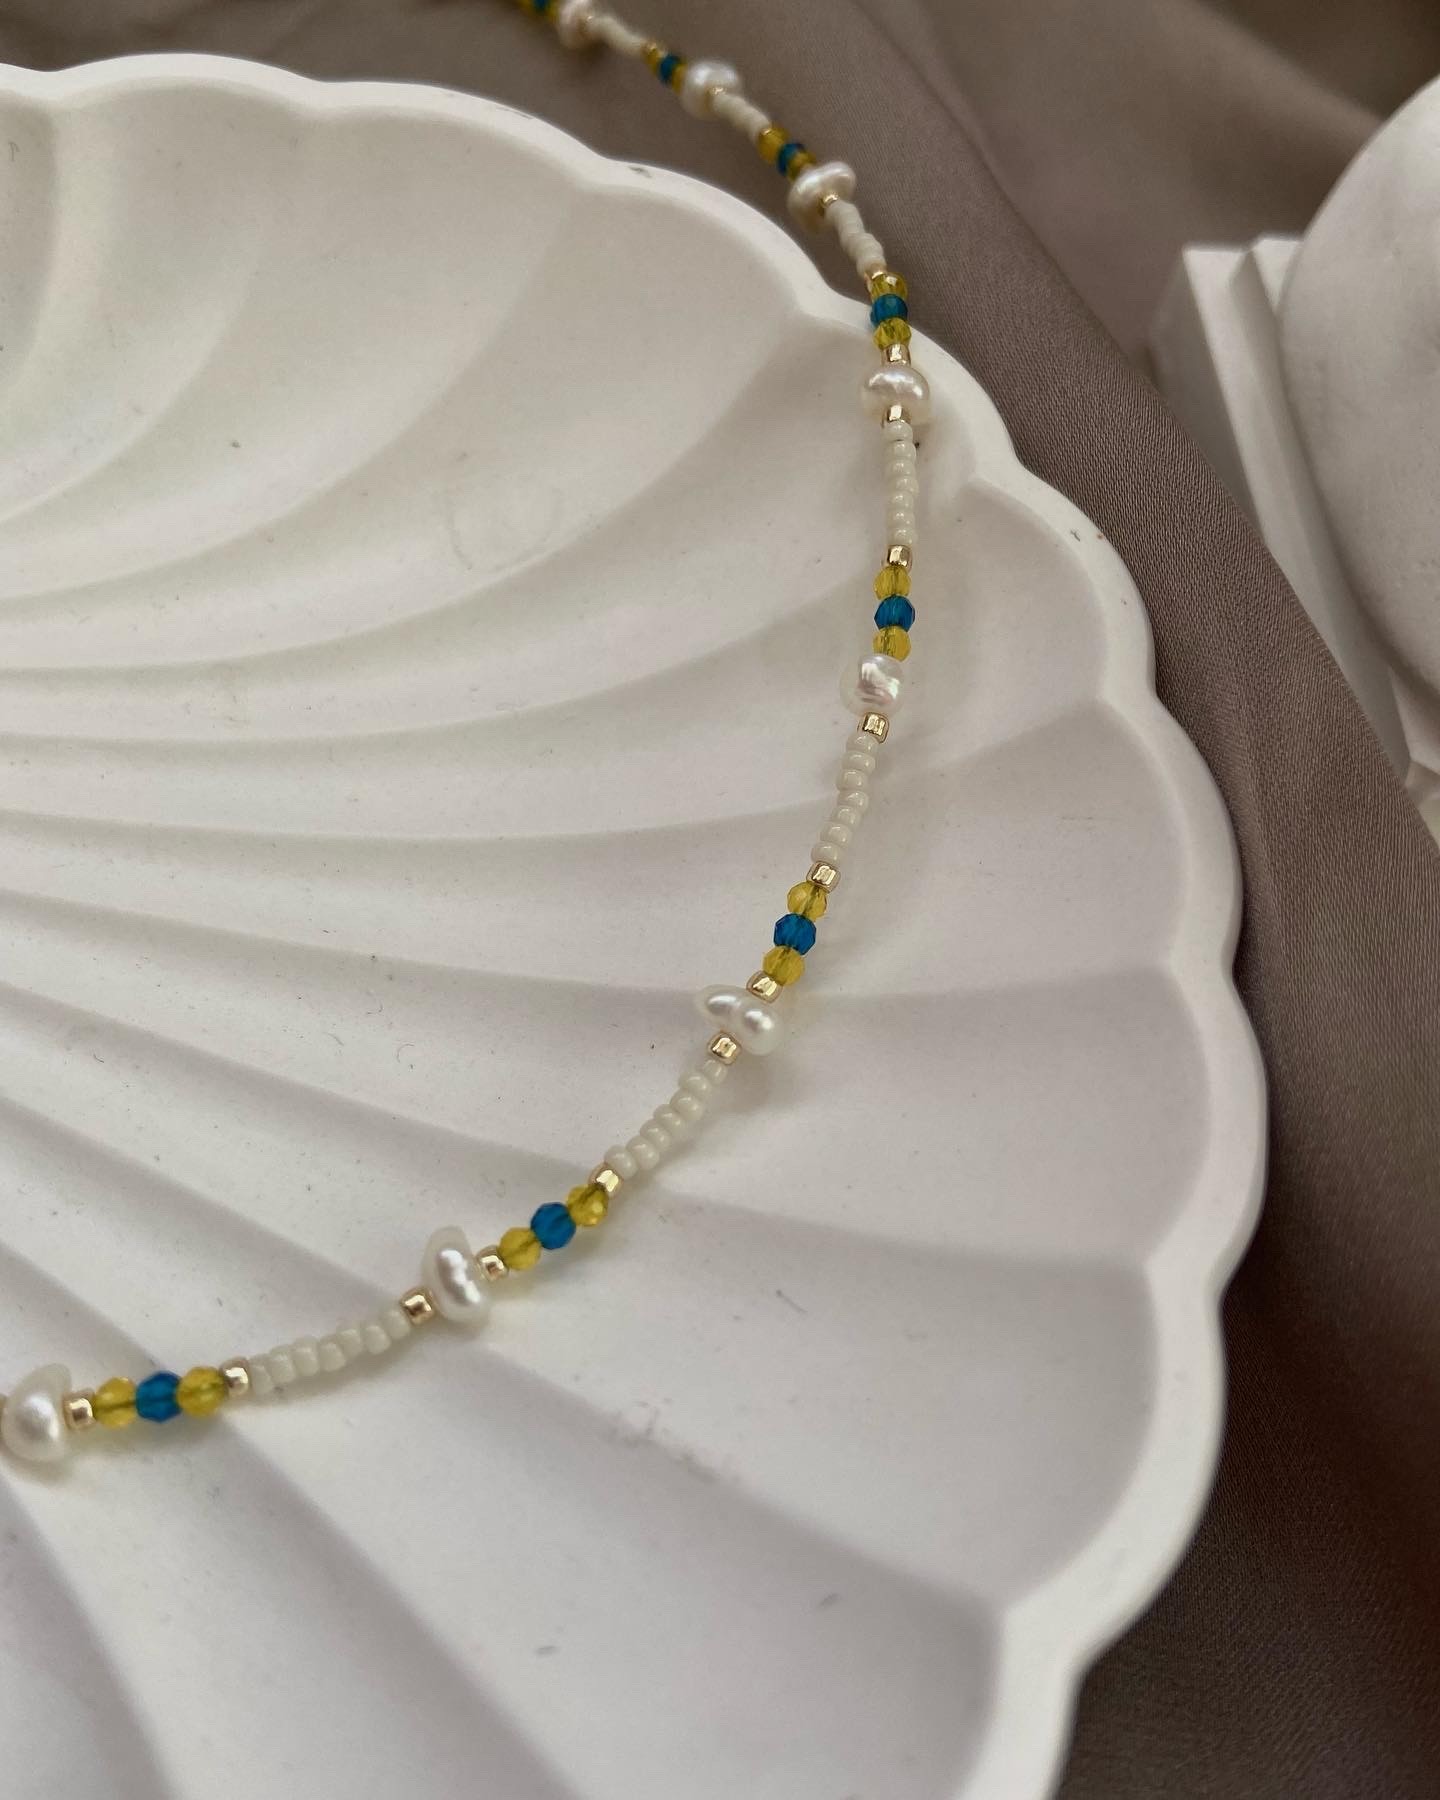 Patriotic yellow and blue choker